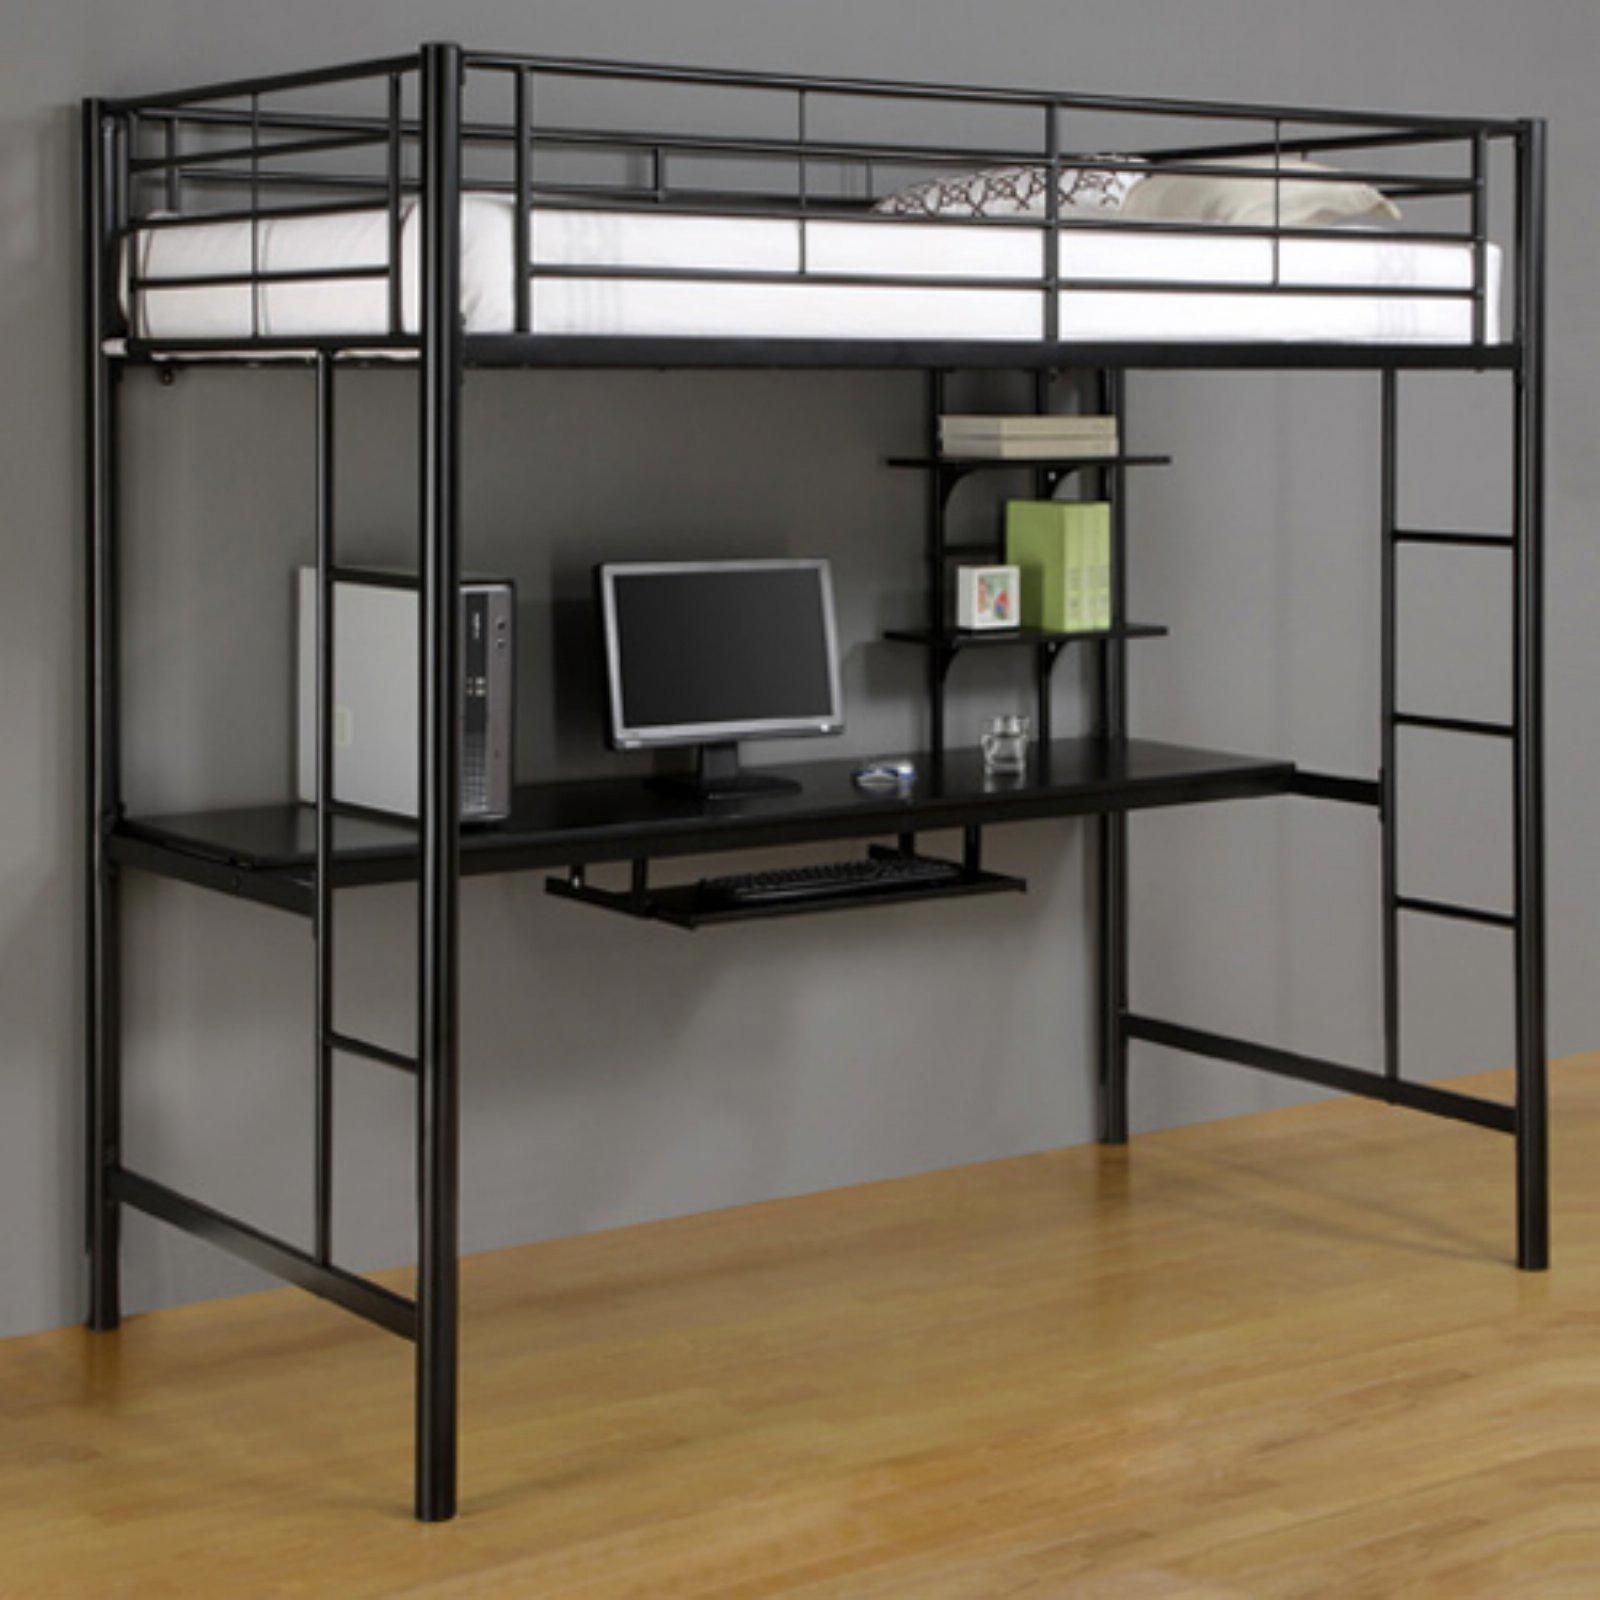 Metal Bunk Bed With Desk Ideas On Foter